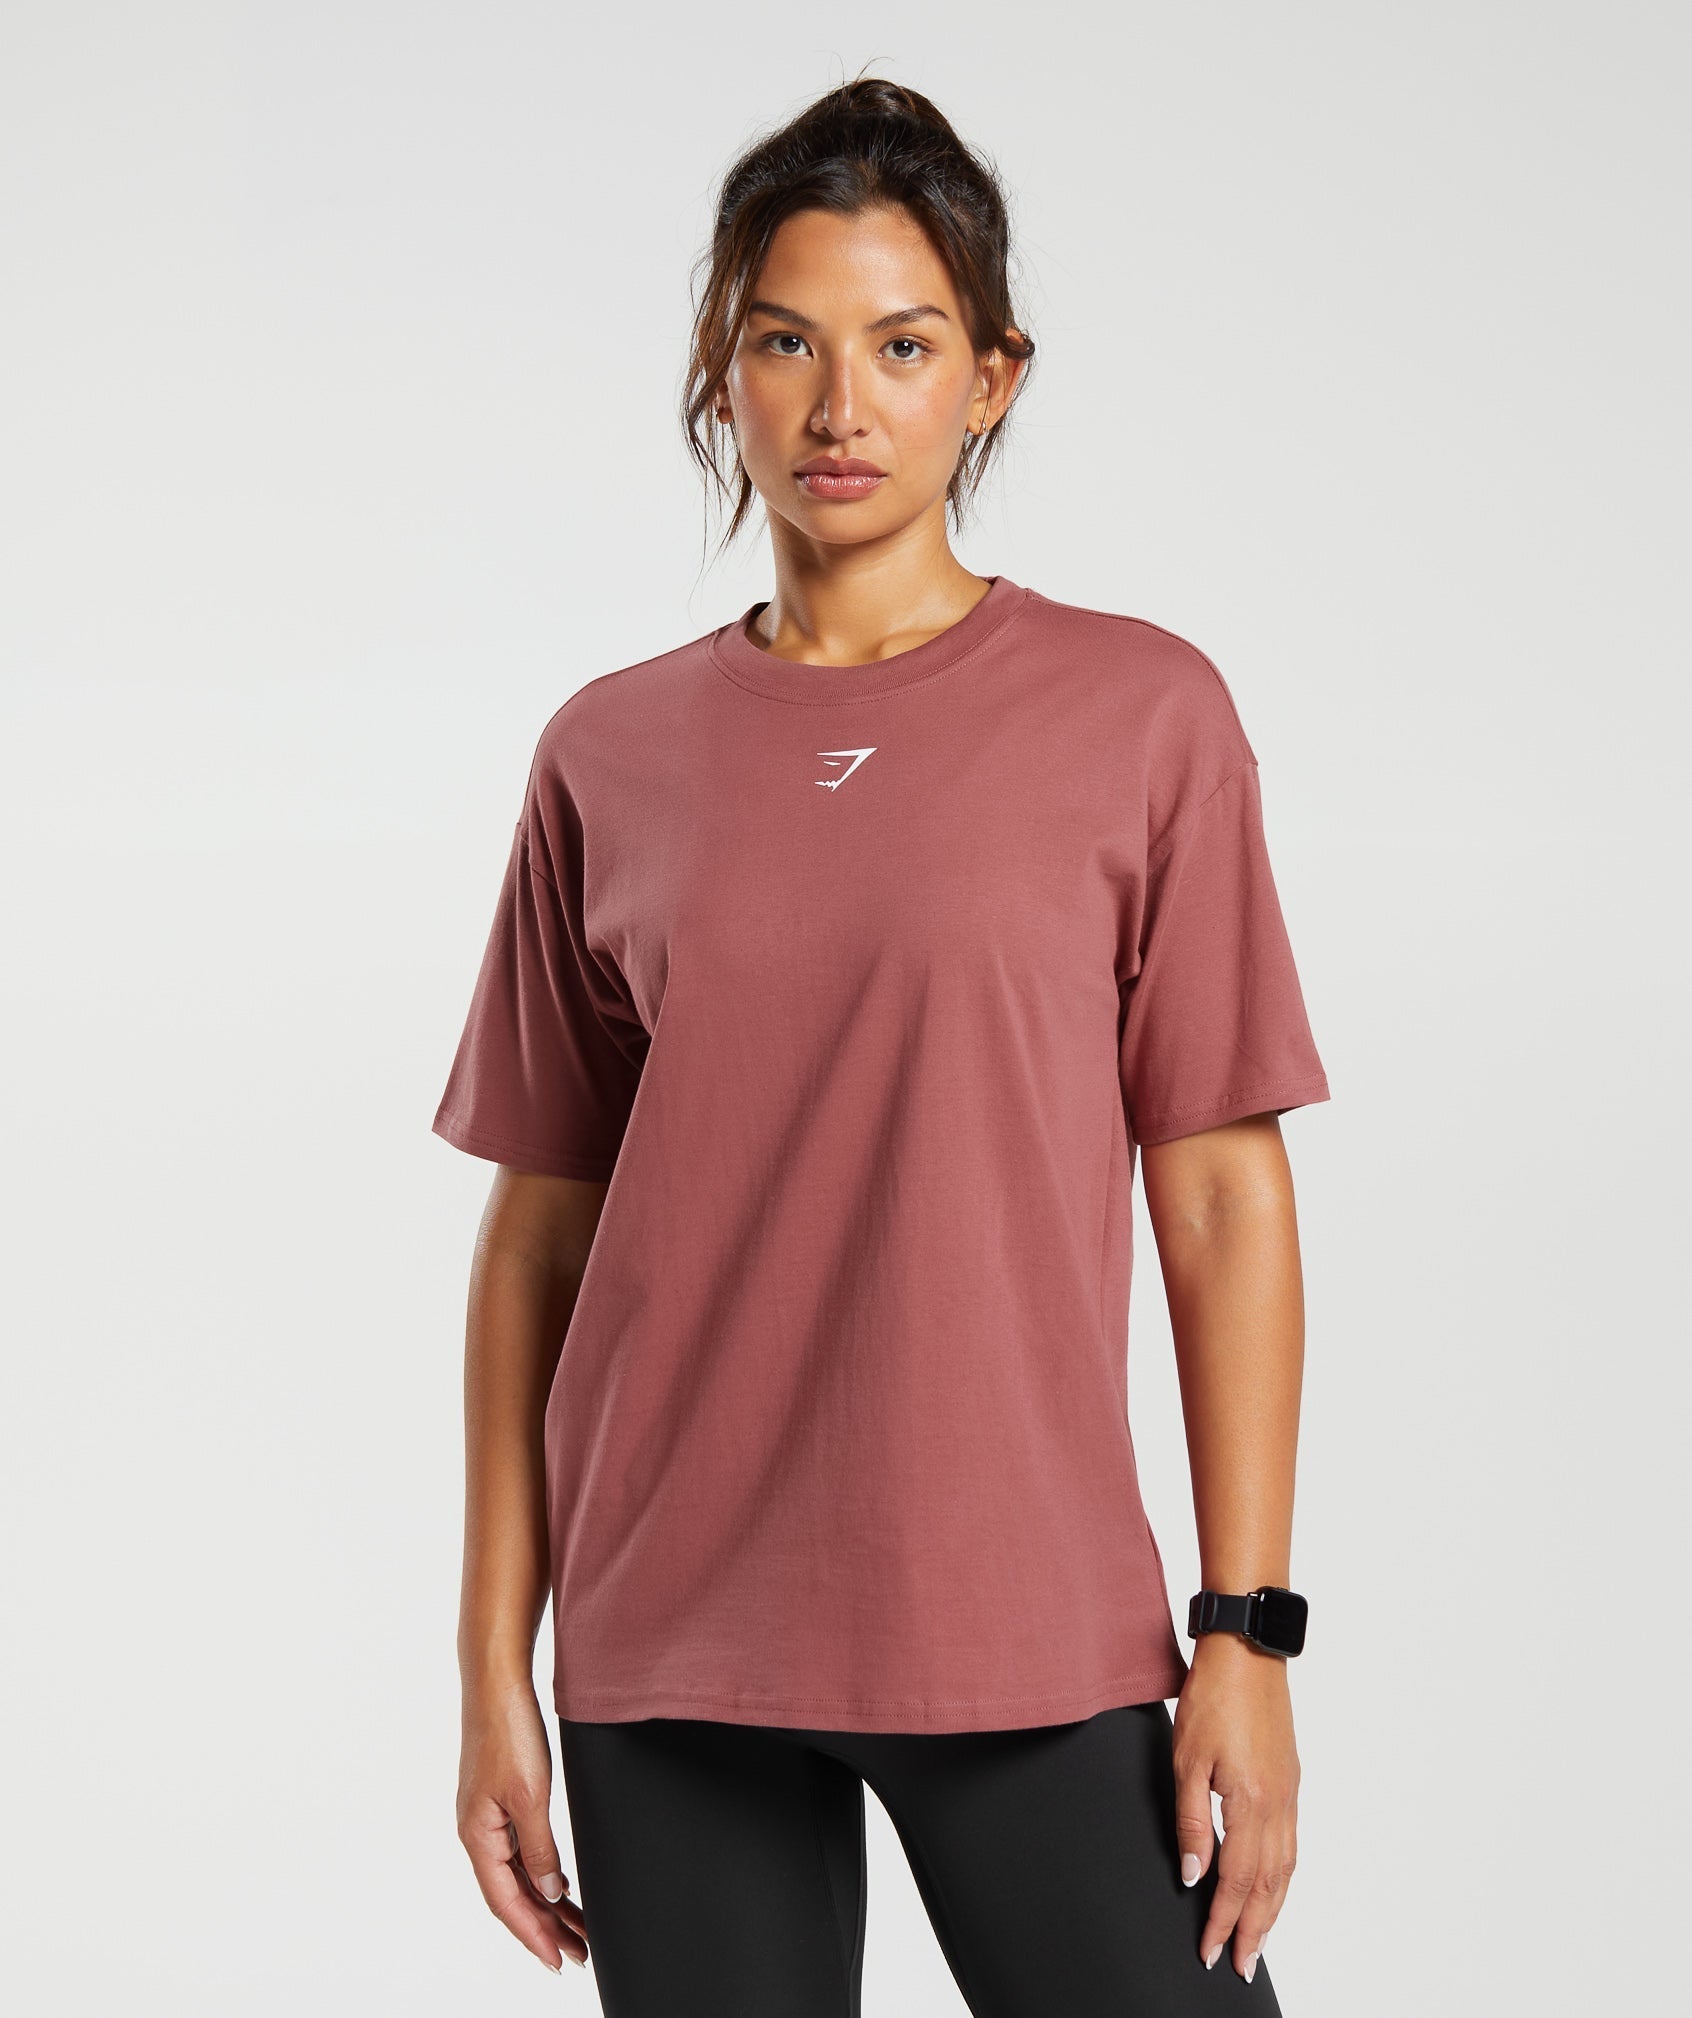 Gymshark Essential oversized tshirt t shirt for gum and exercising